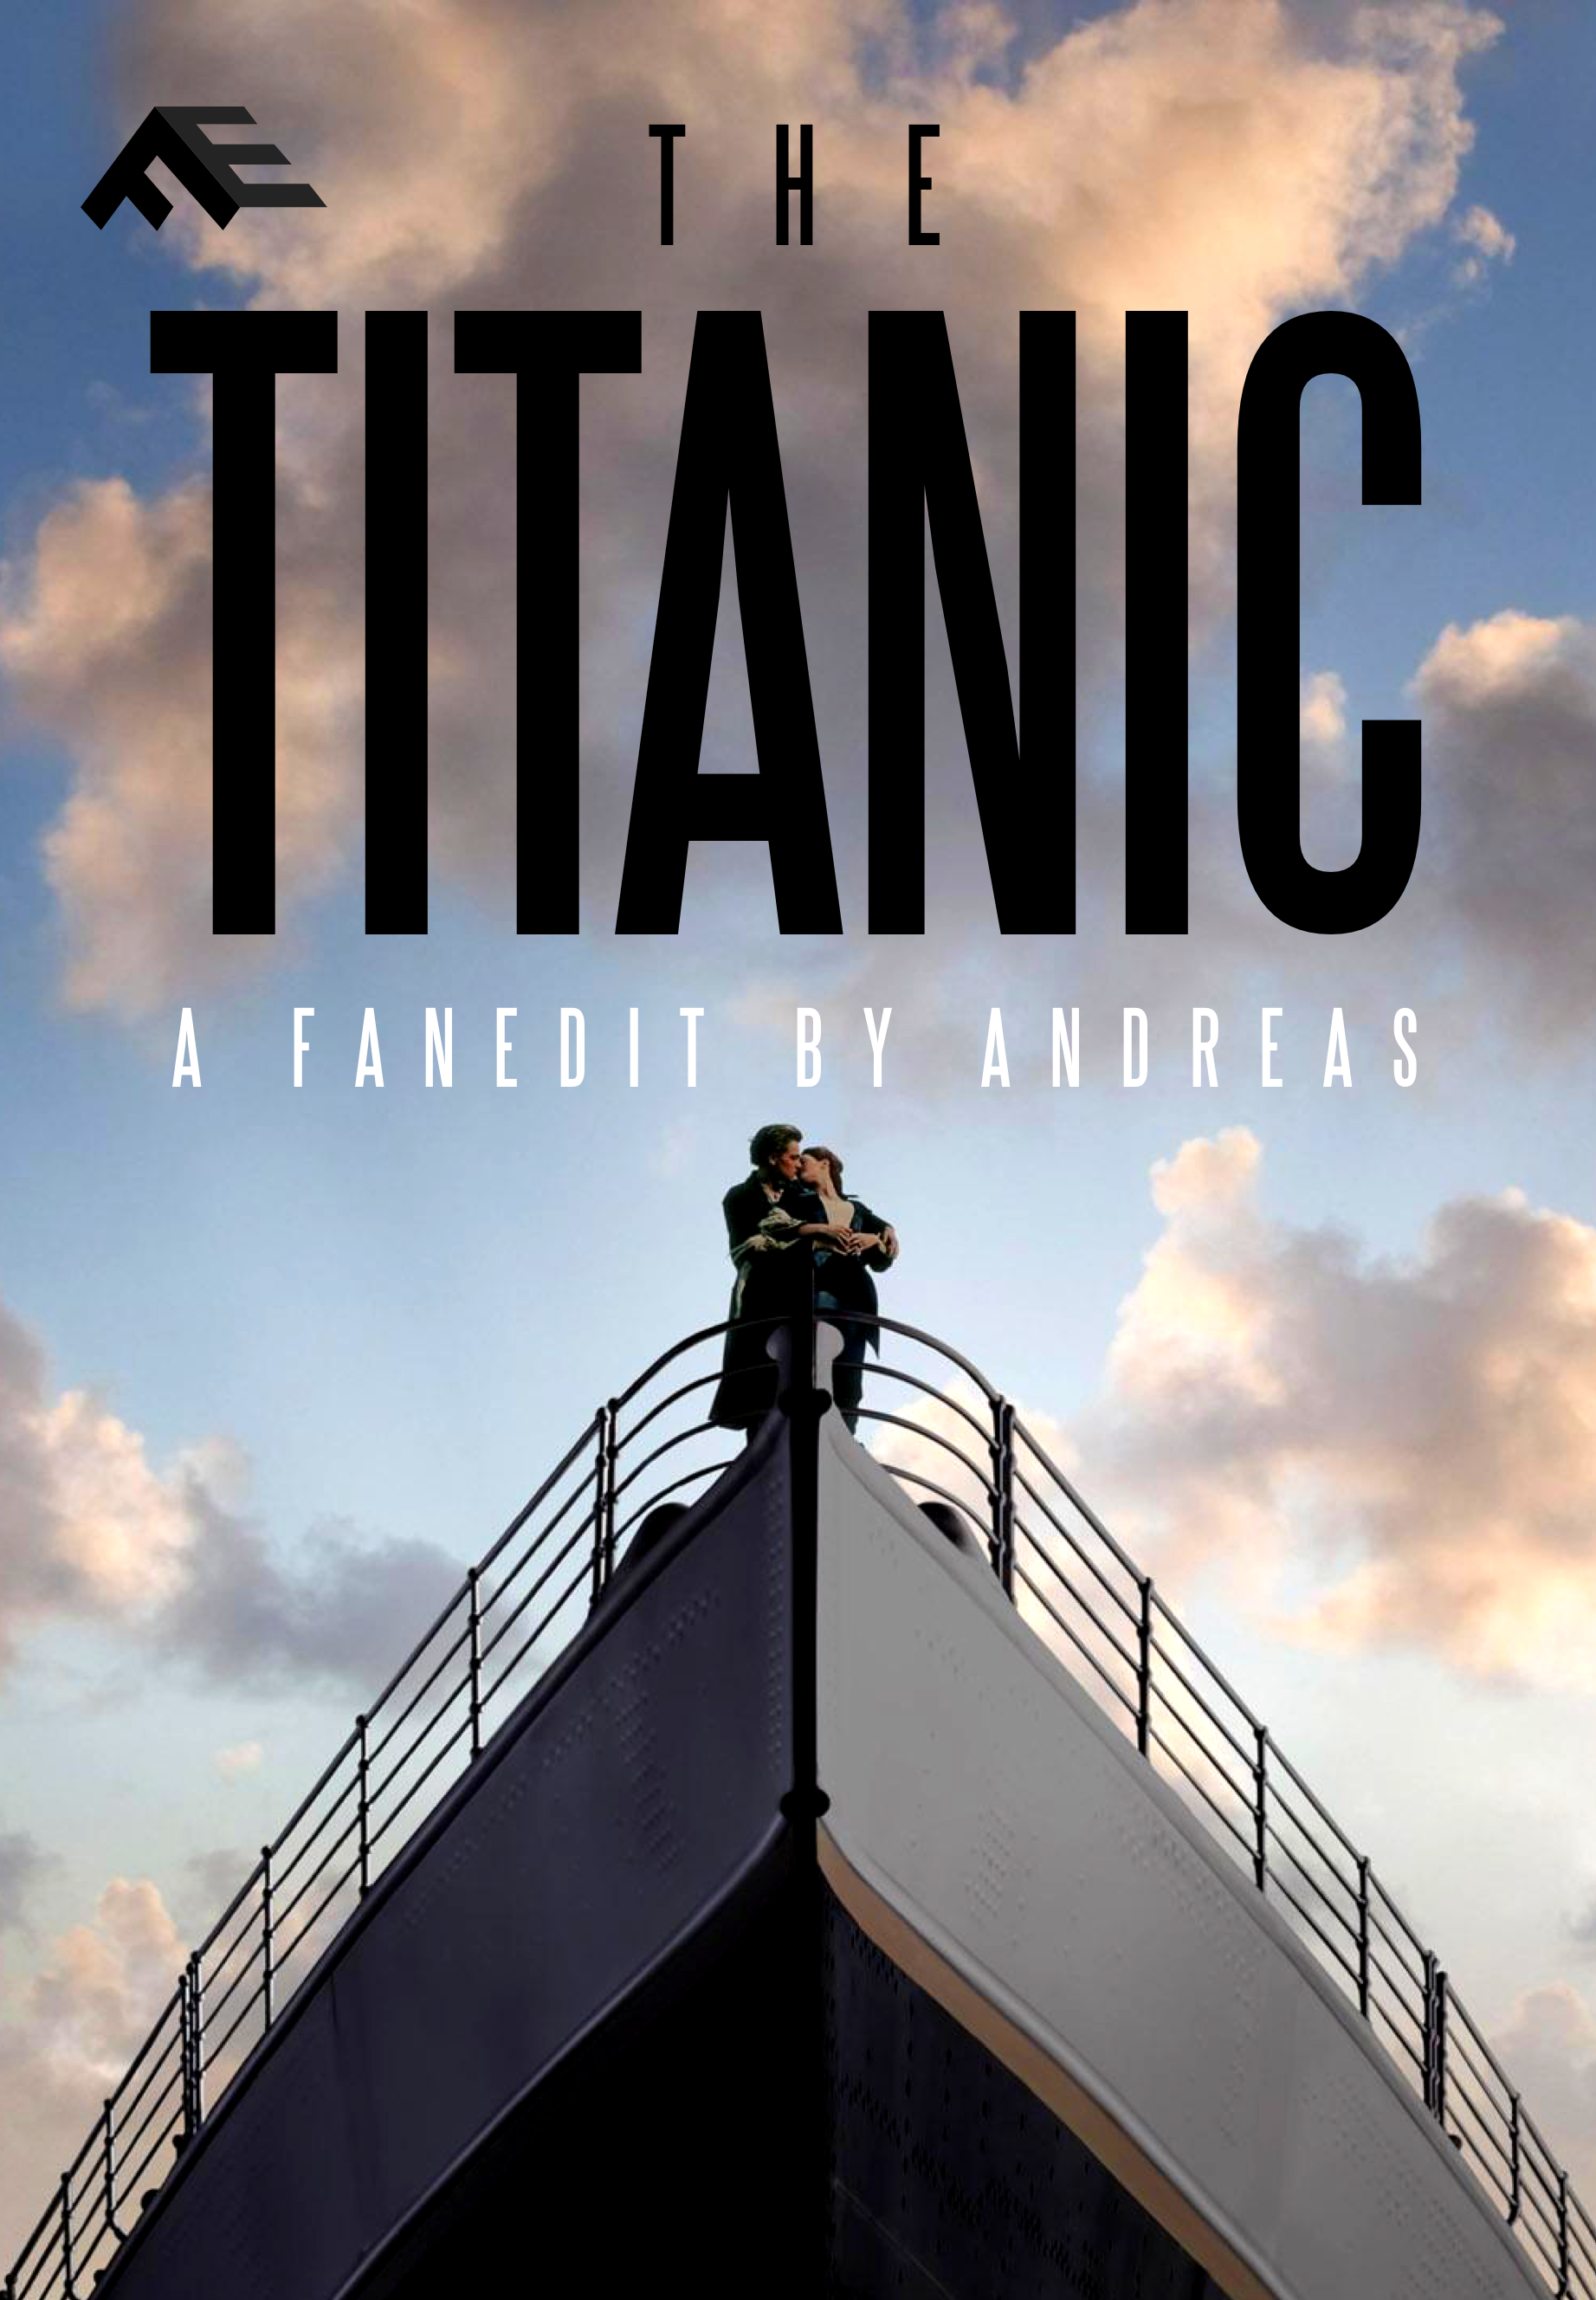 thetitanicalternate-poster.png